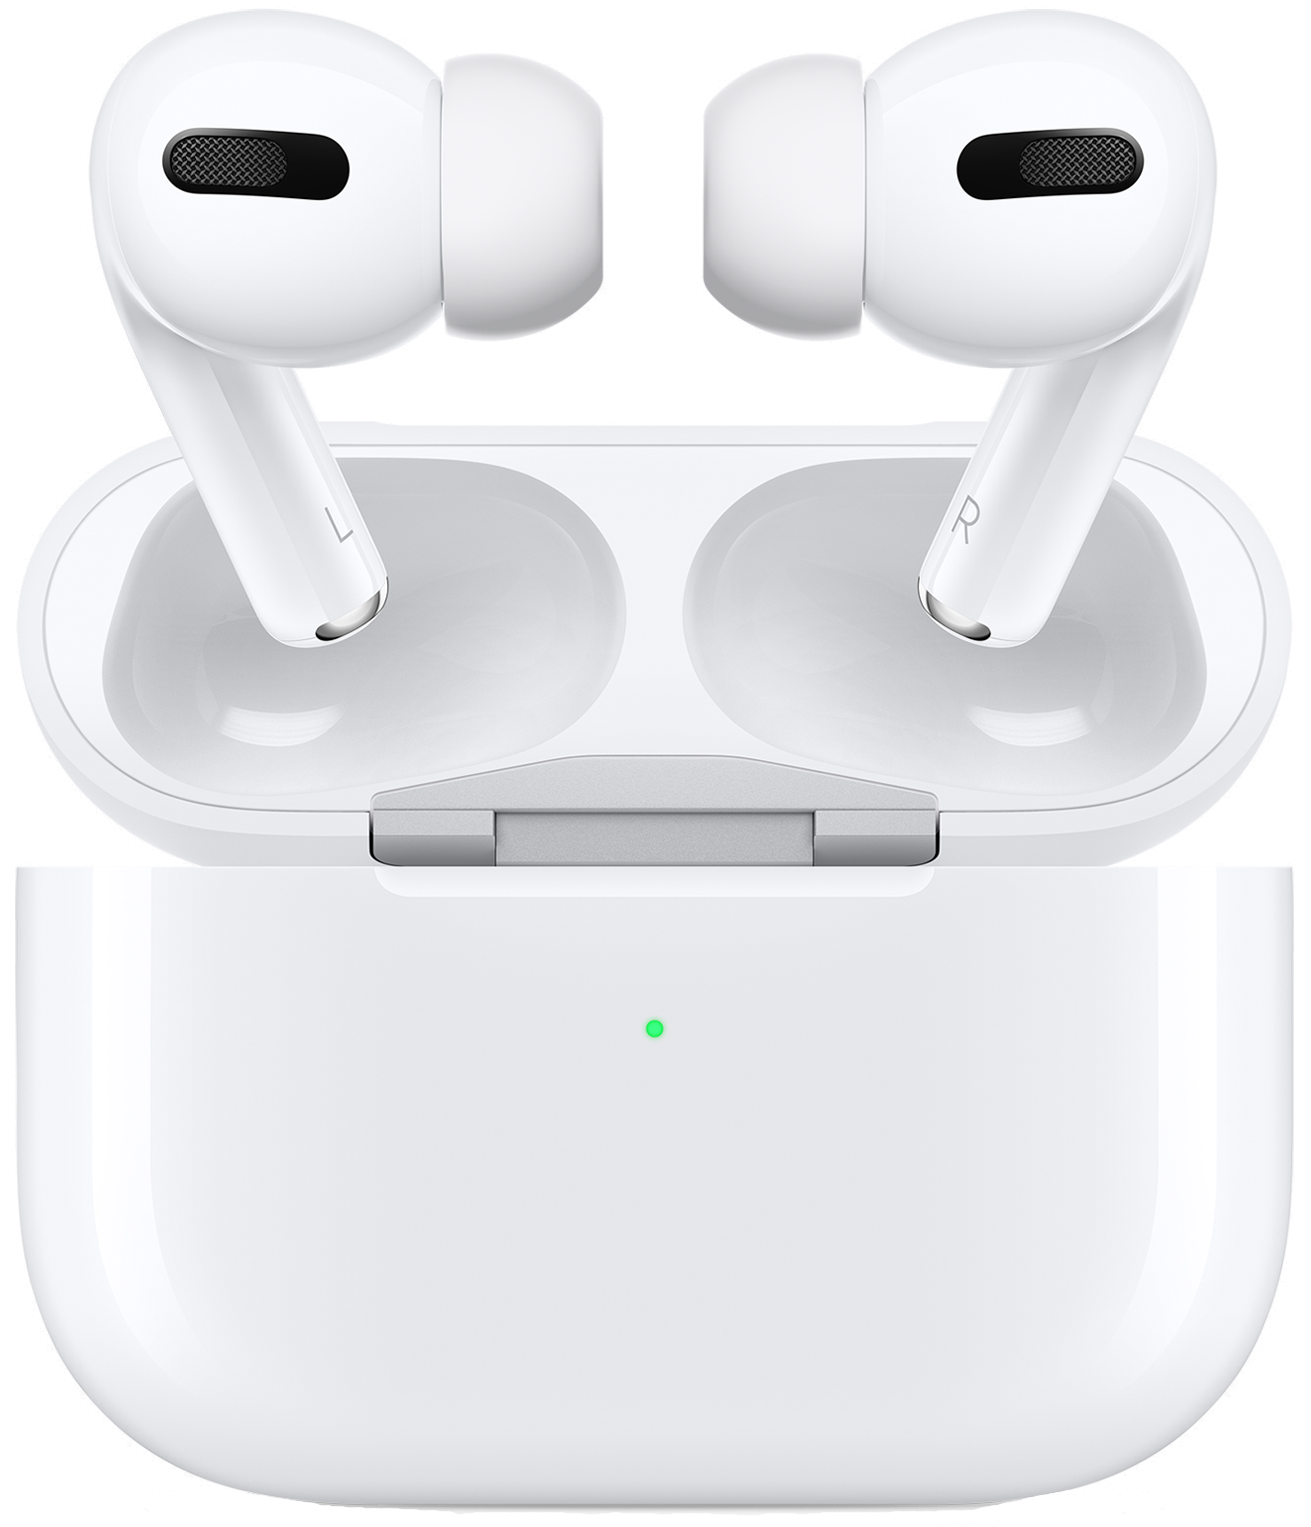 airpods pro airpods what the difference and #32430